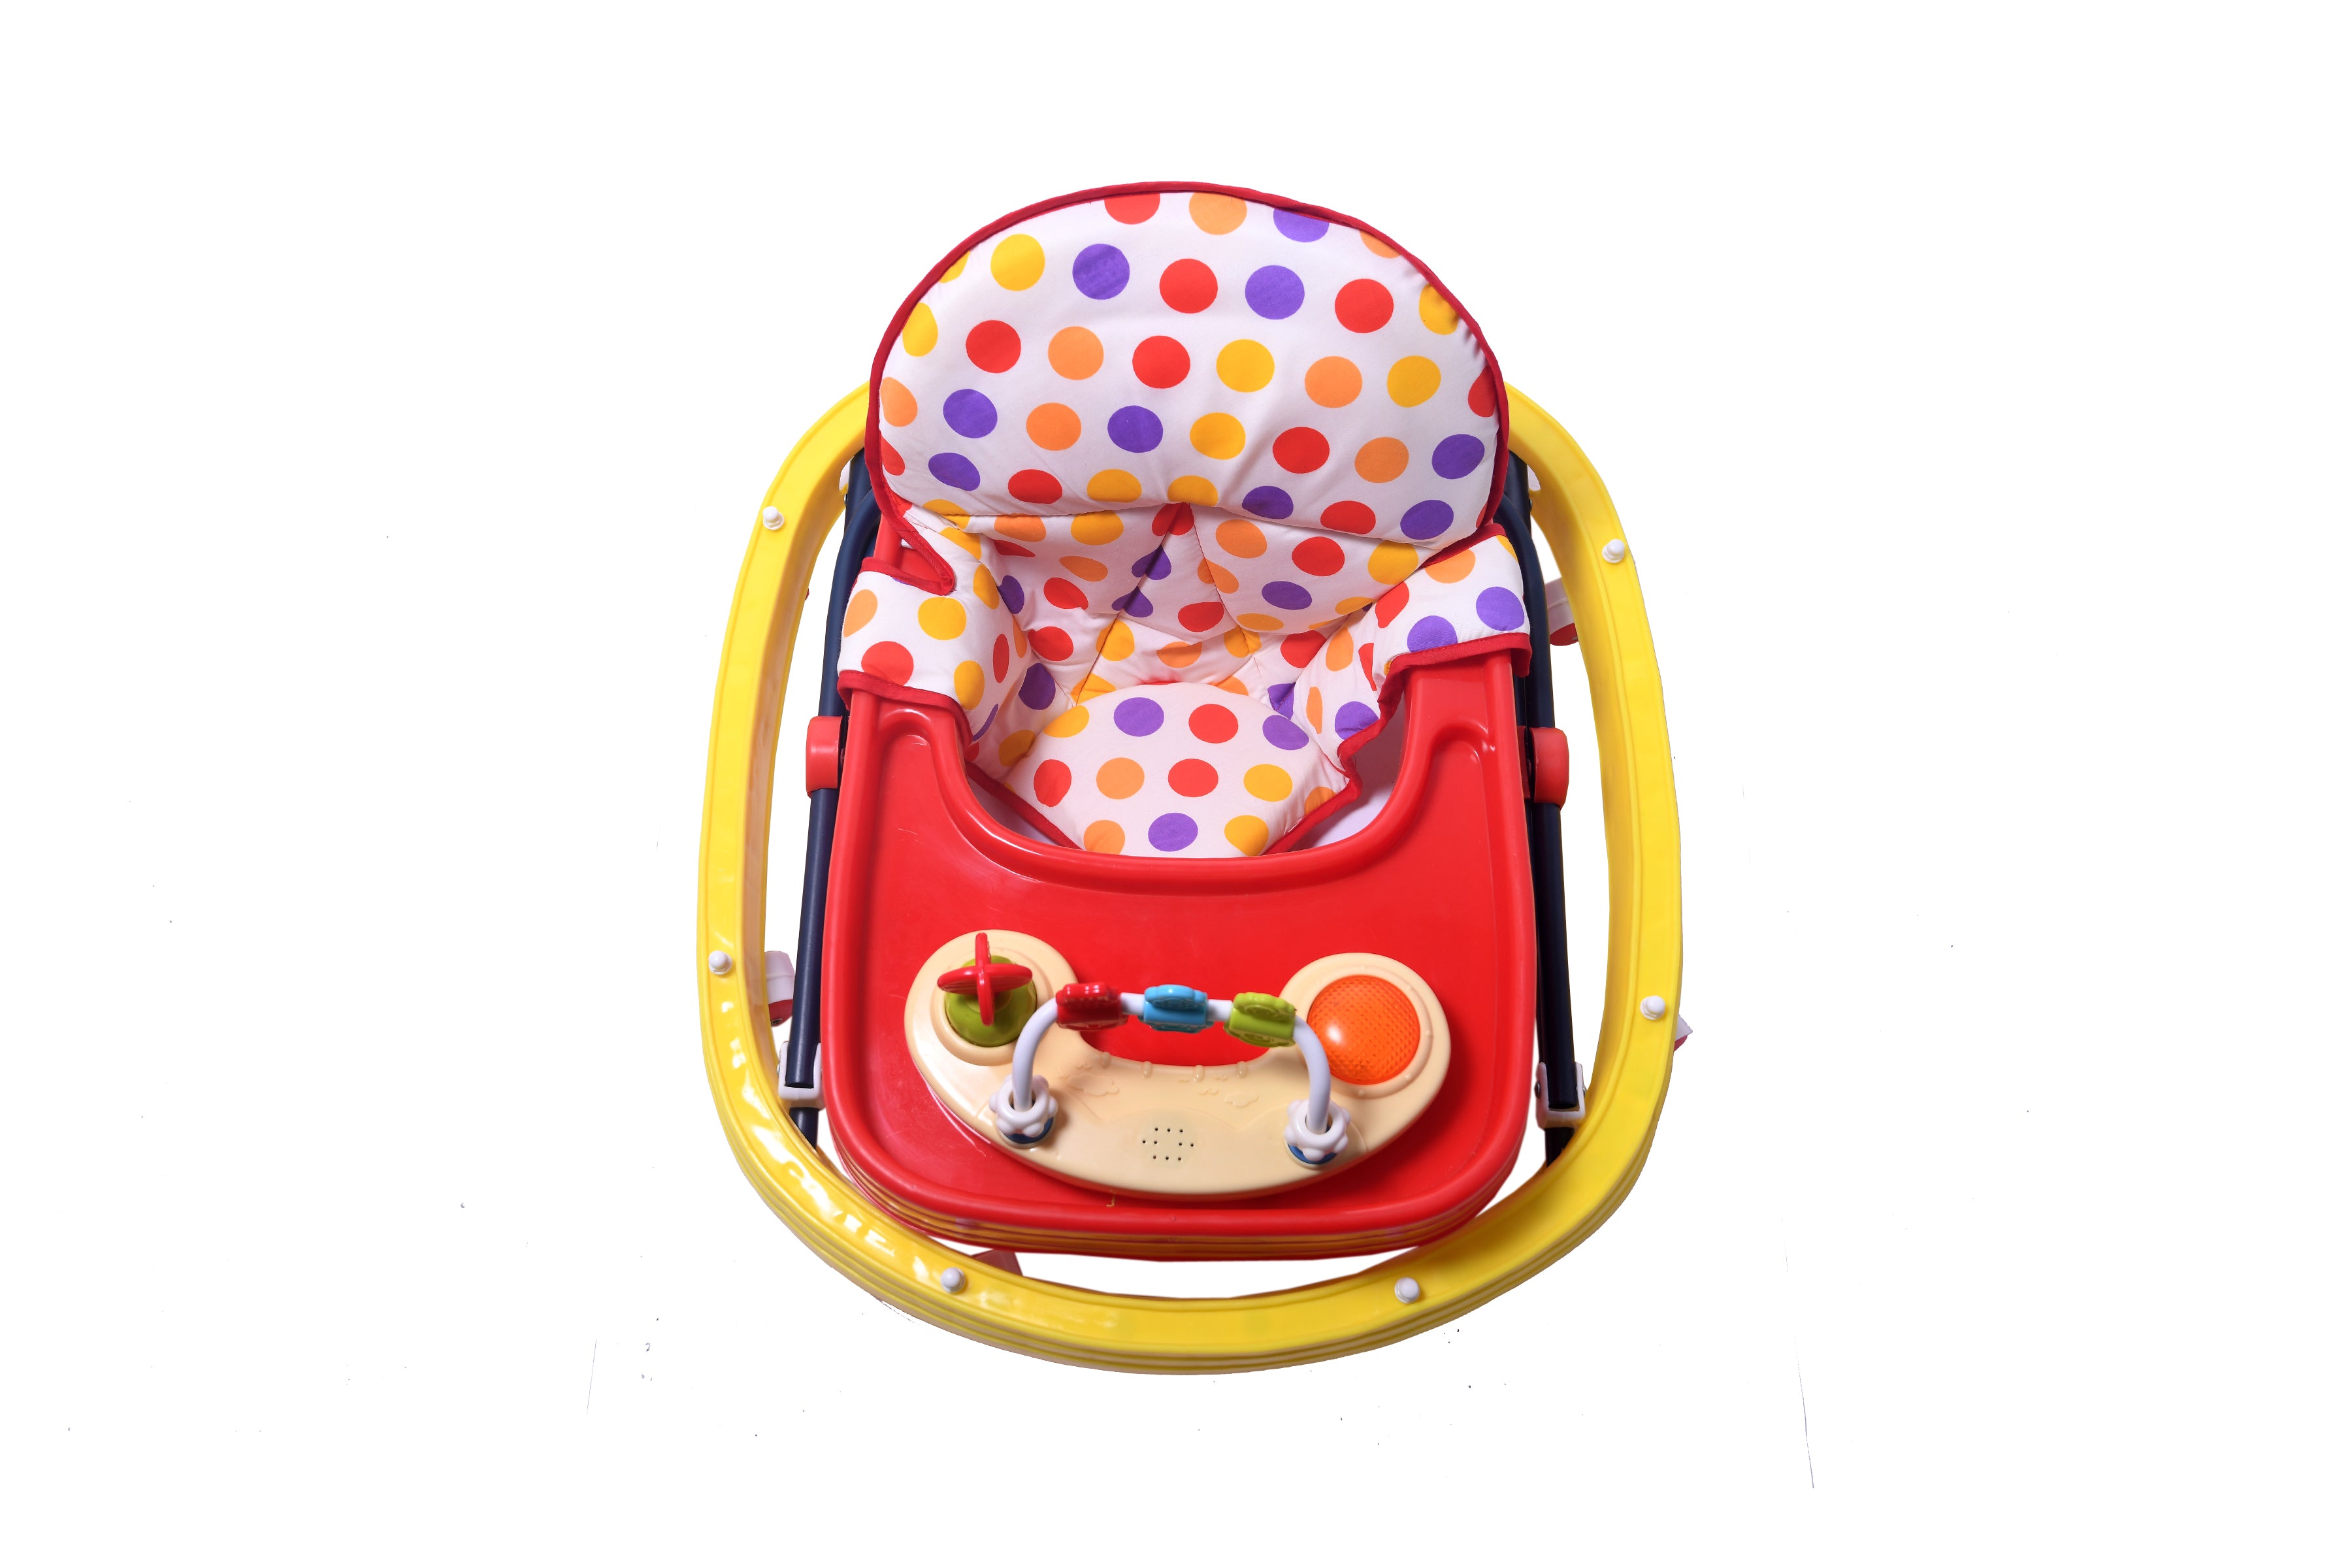 INFANTO Baby Wonder Walker for 6 to 18 Months-BW36